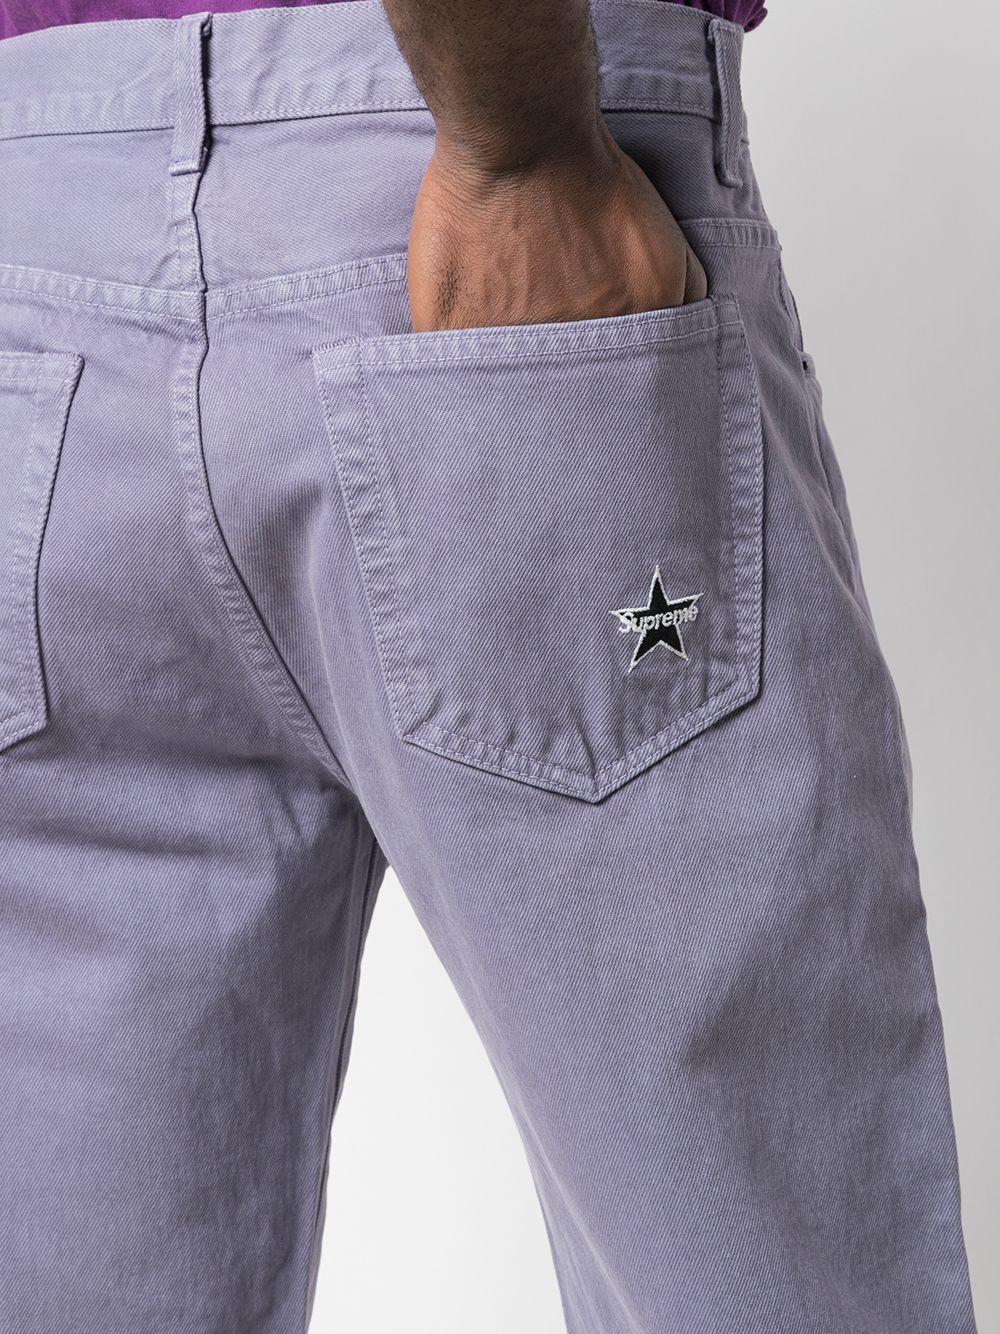 Supreme Washed Regular Jeans in Purple for Men | Lyst Canada